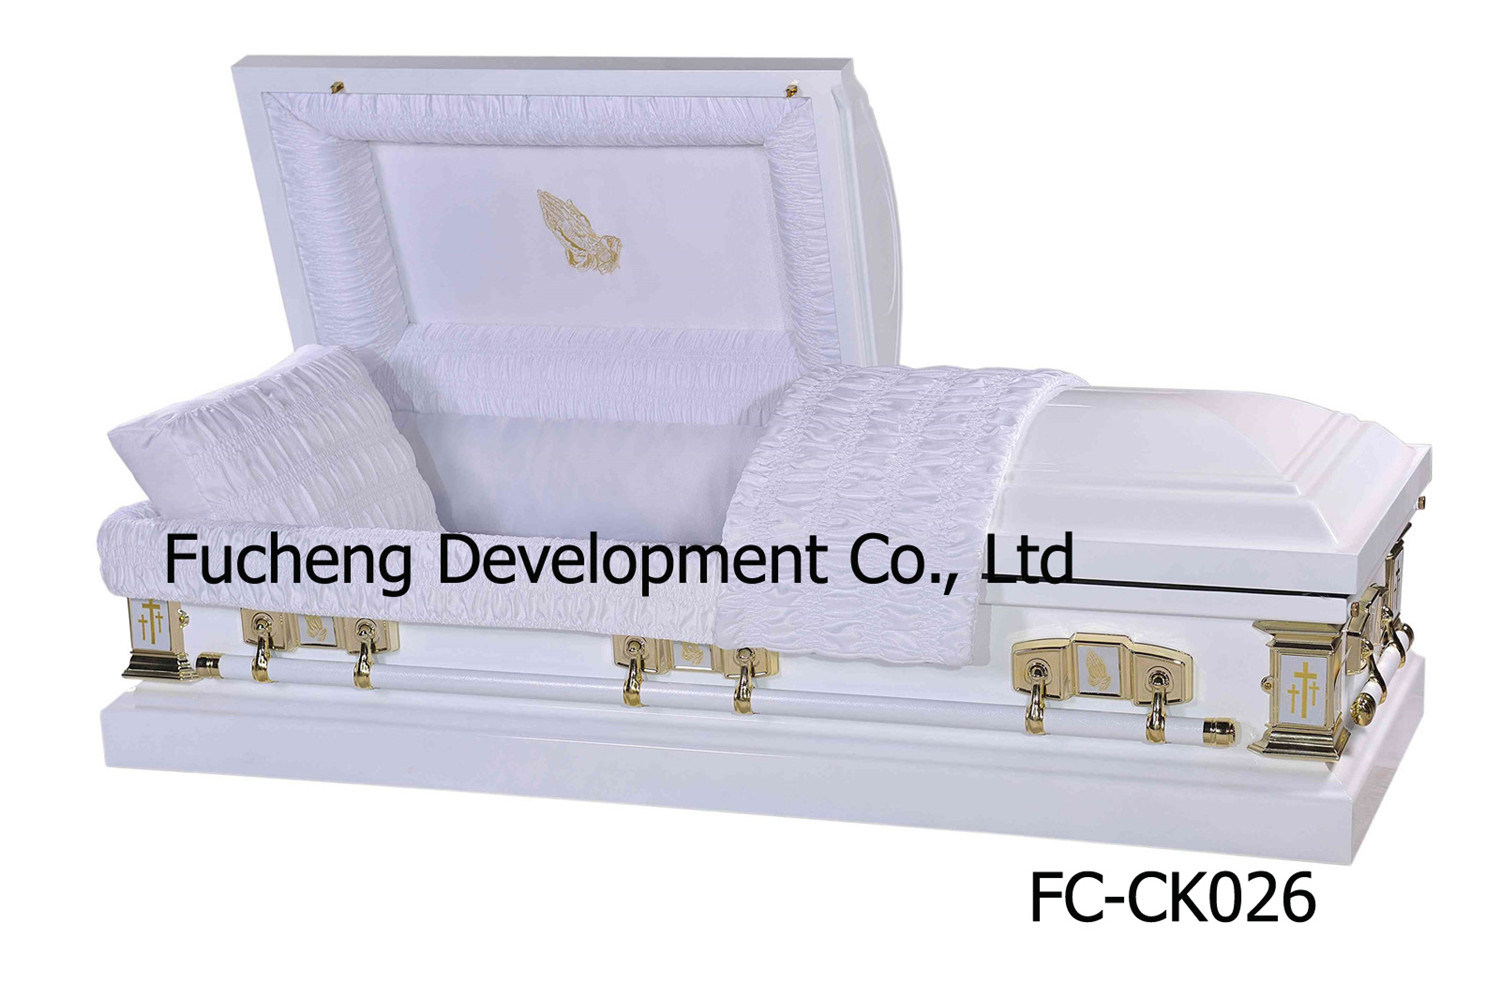 Newest and Hotest American Style Furneral Metal Casket, Coffin - White Finish & White Crepe Interiors SGS (FC-CK026)